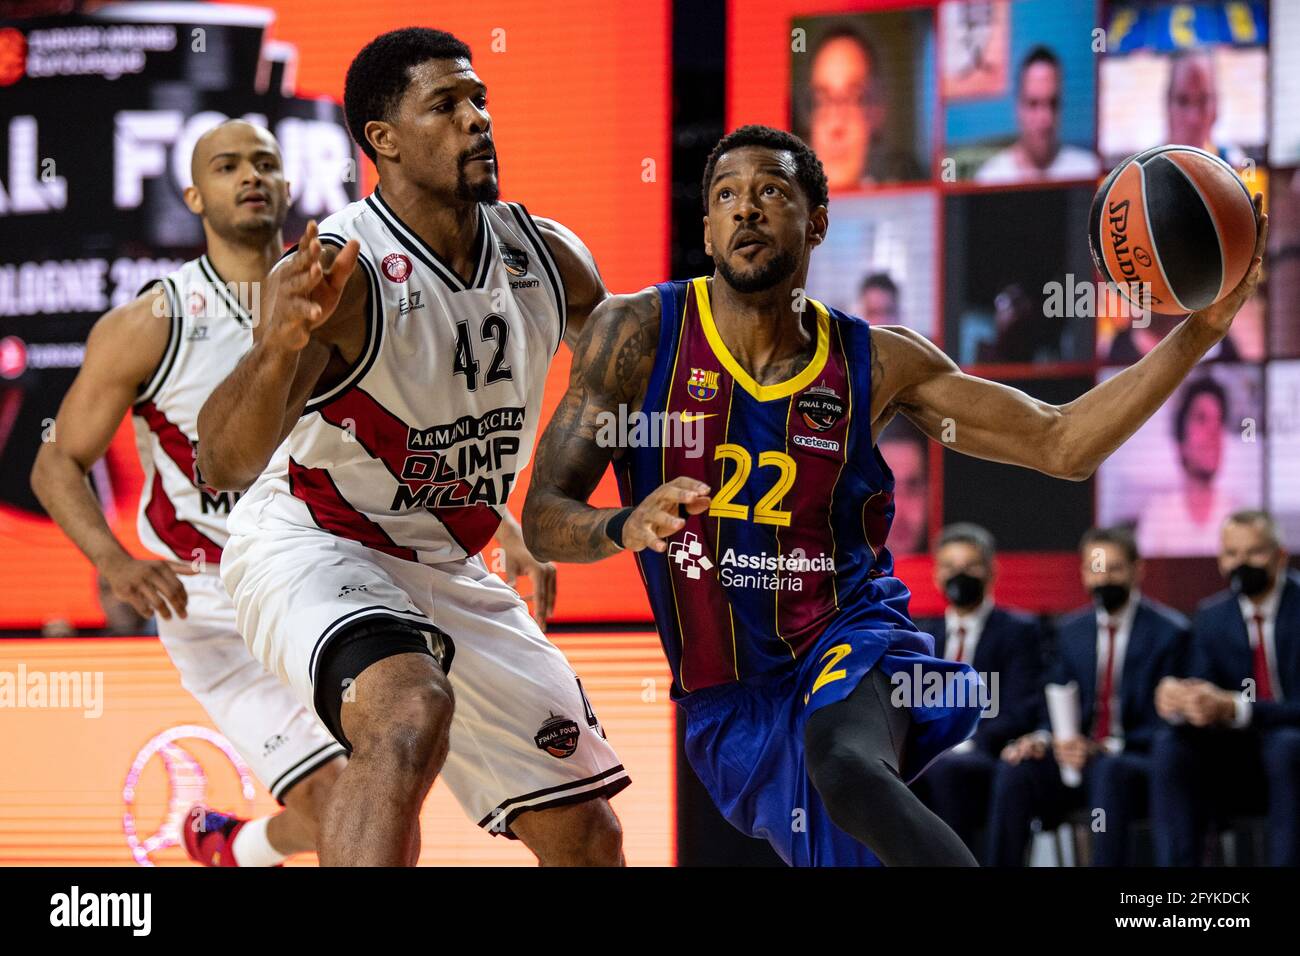 Cologne, Germany. 28th May, 2021. Basketball: Euroleague, FC Barcelona -  Olimpia Milan, Final Four, Semifinals. Milan's Kyle Hines (l) and  Barcelona's Cory Higgins fight for the ball. Credit: Marius  Becker/dpa/Alamy Live News